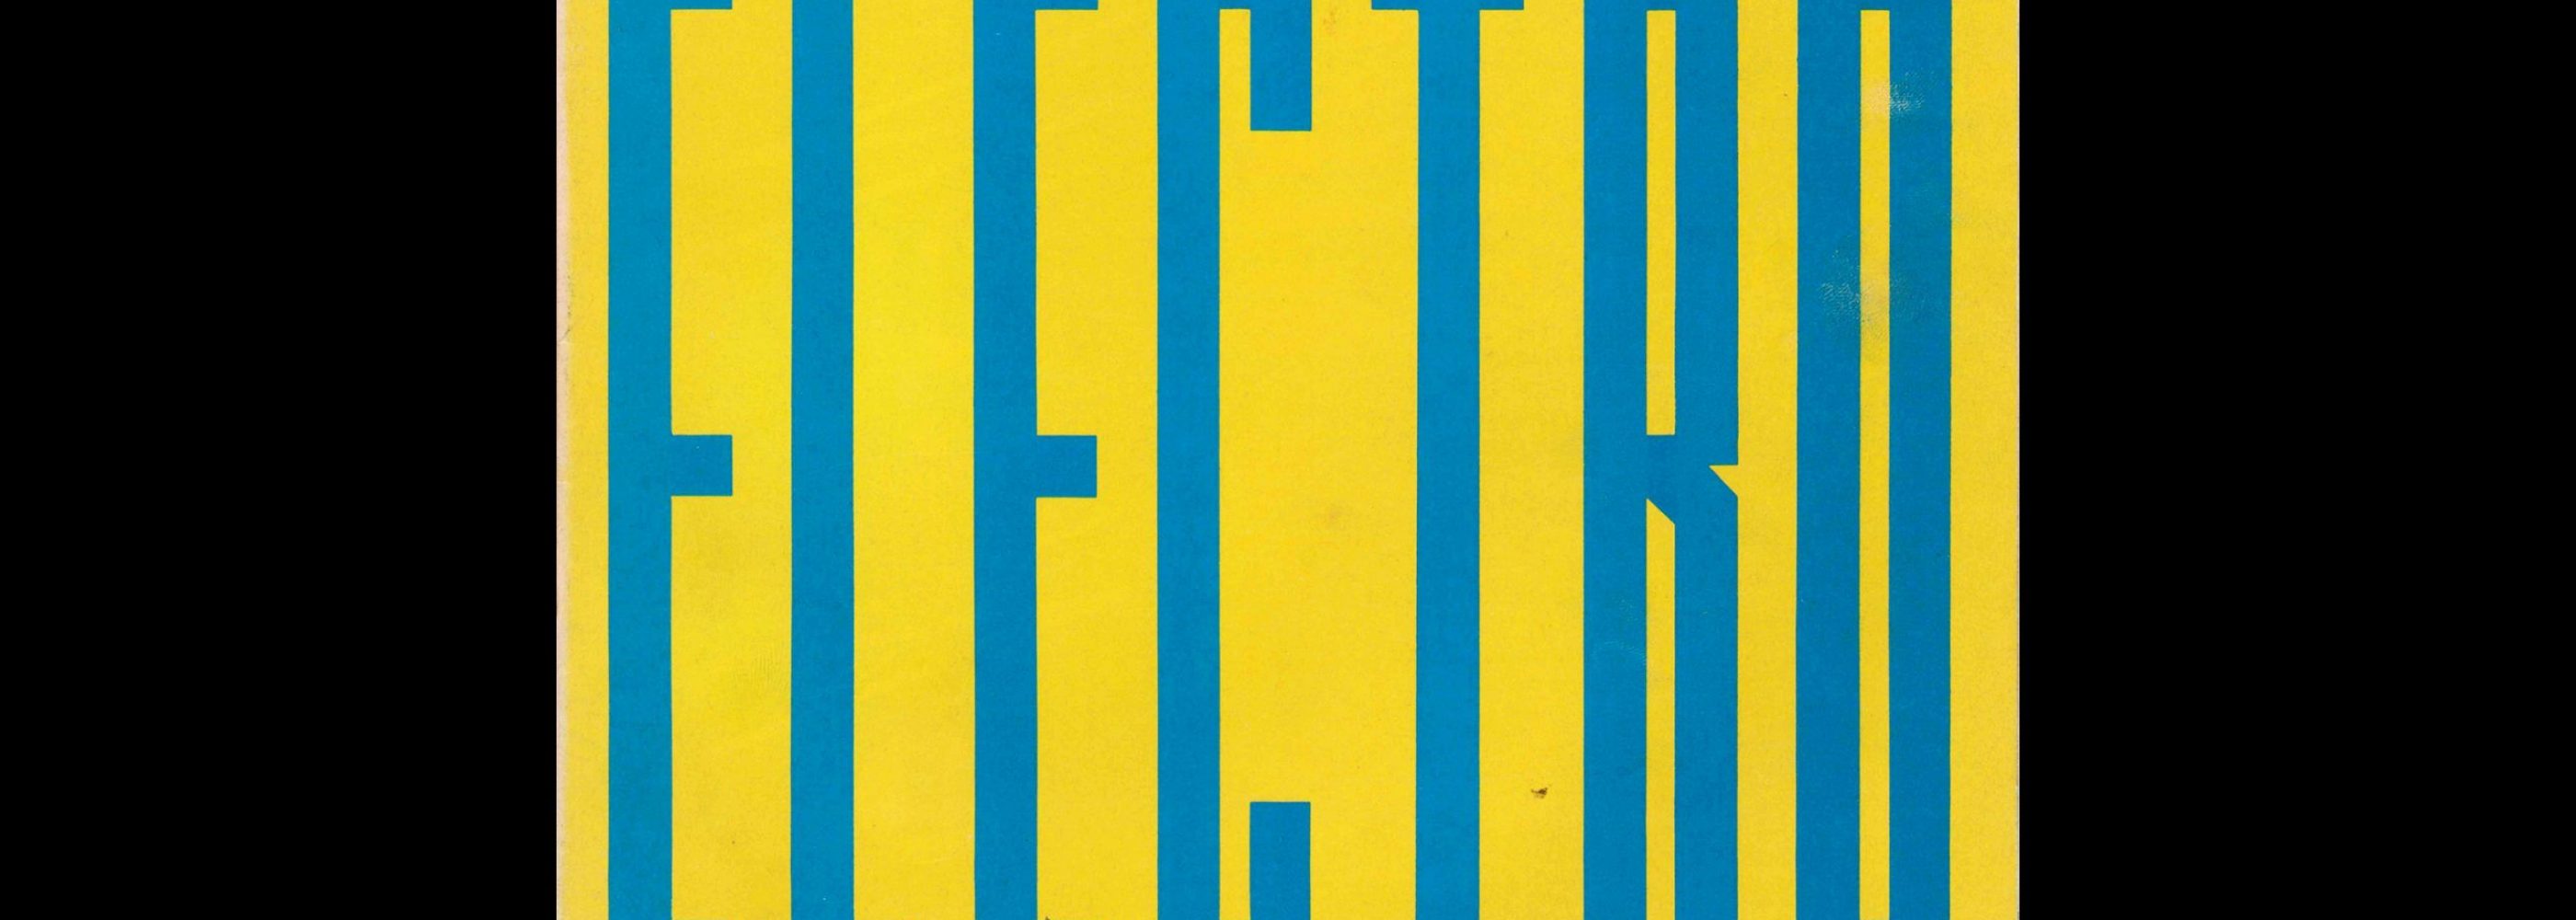 The Face, Electro, 1984. Designed by Neville Brody